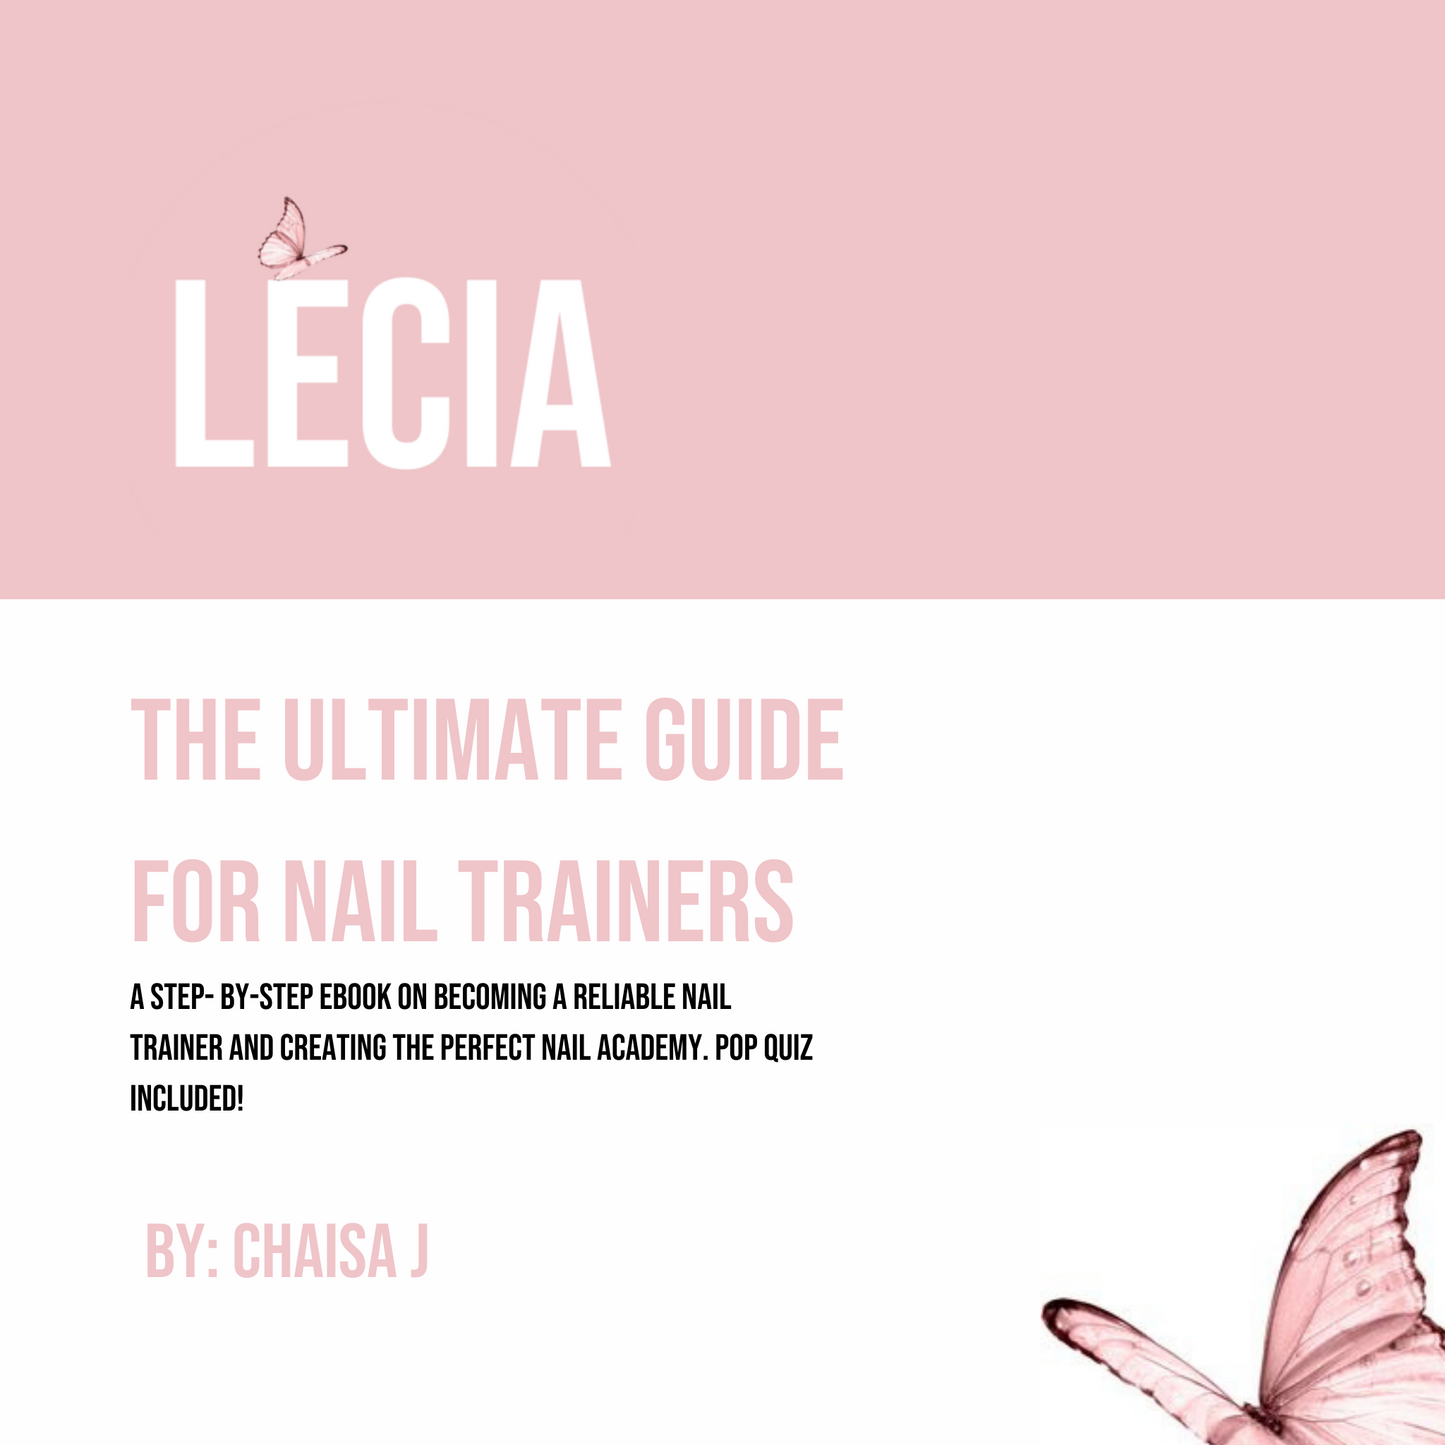 The Ultimate Guide For Nail Trainers